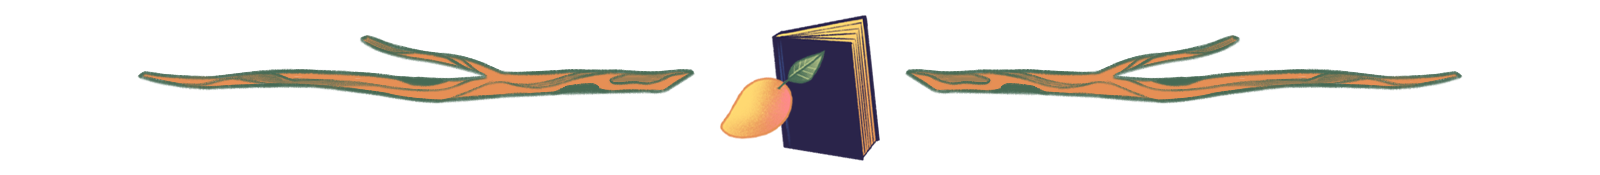 Illustration of book and tree branches used to divide story text